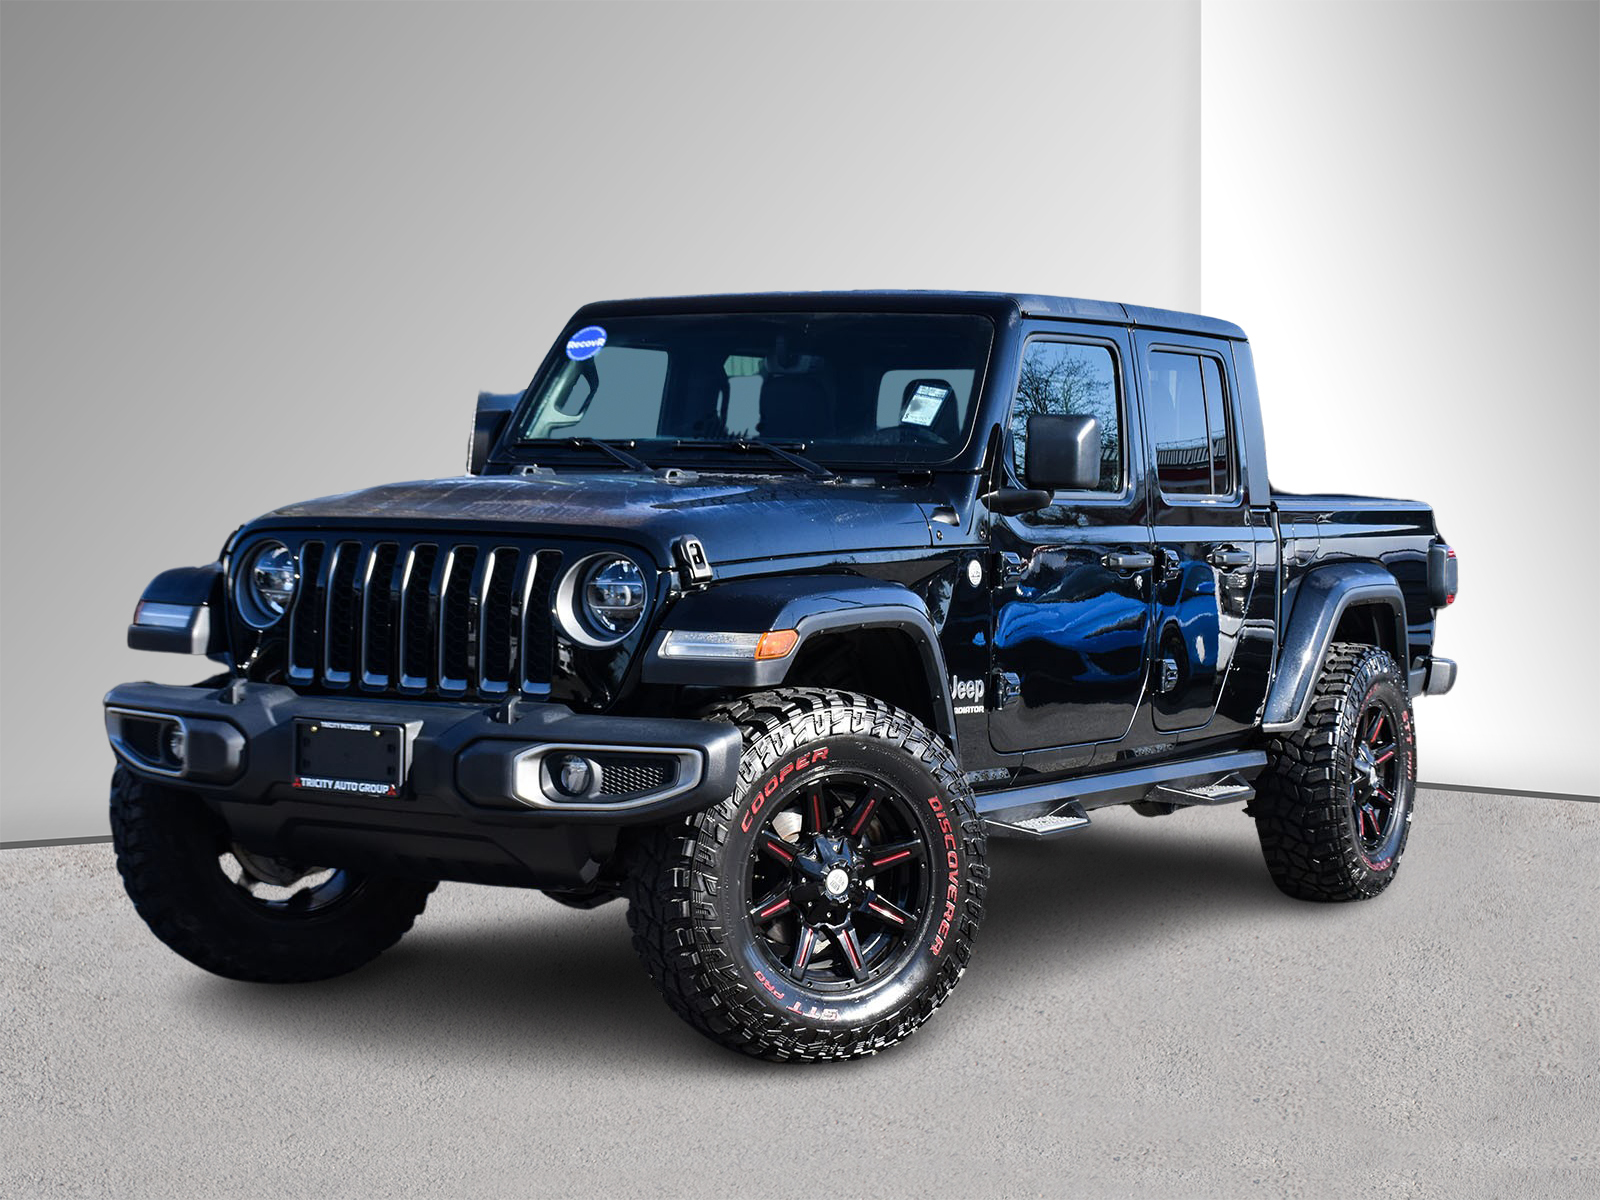 2020 Jeep Gladiator Overland - No Accidents, Leather, Navigation